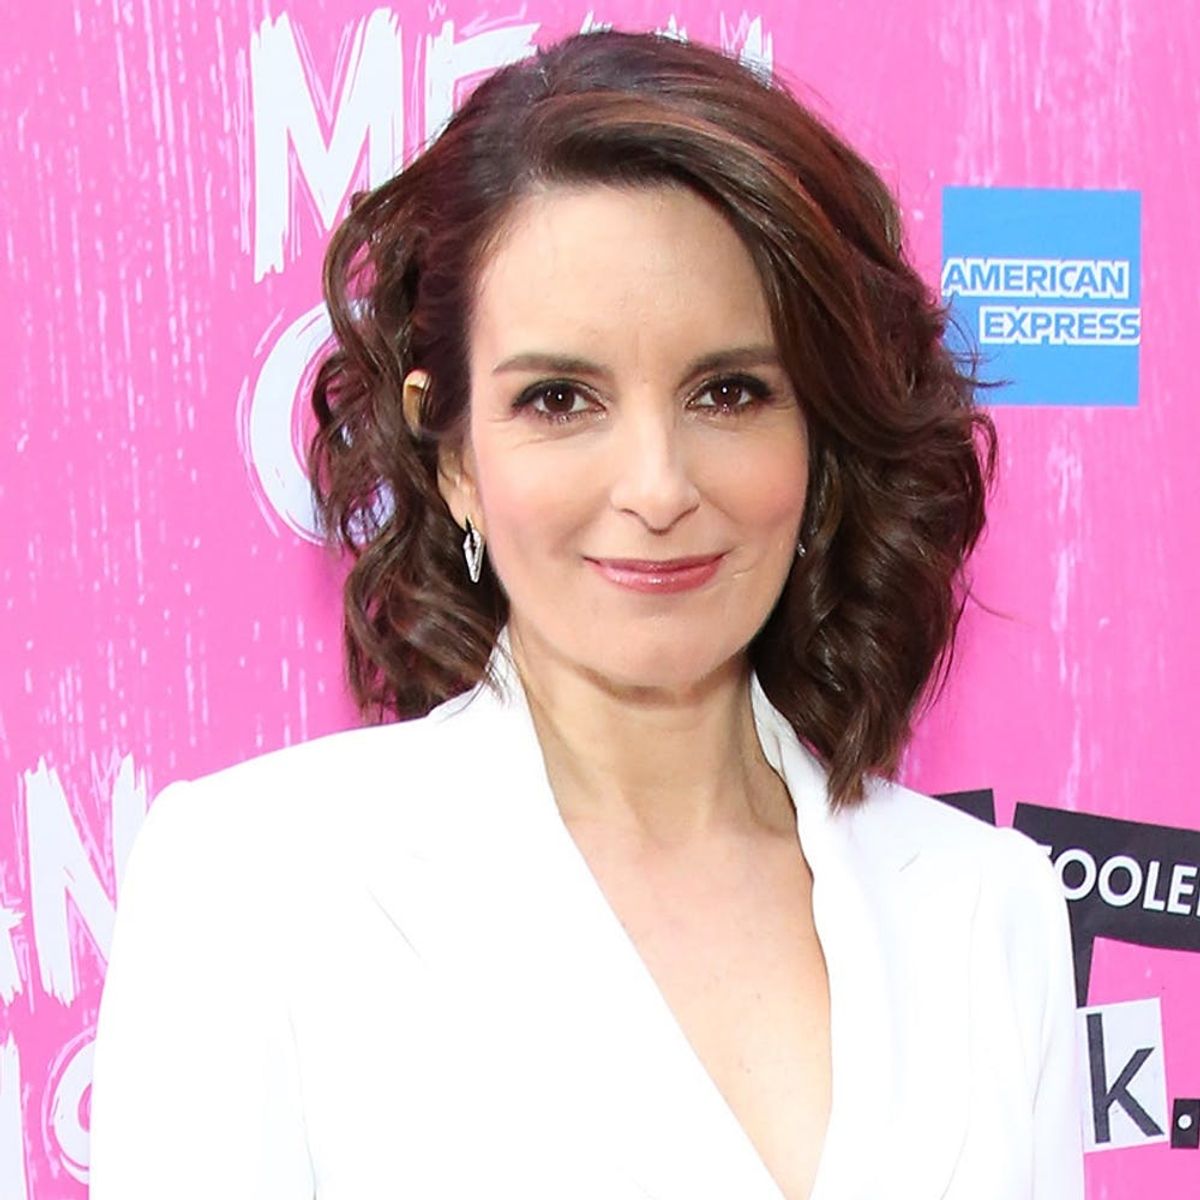 Tina Fey on Why ‘Mean Girls’ Is More Timely Than Ever